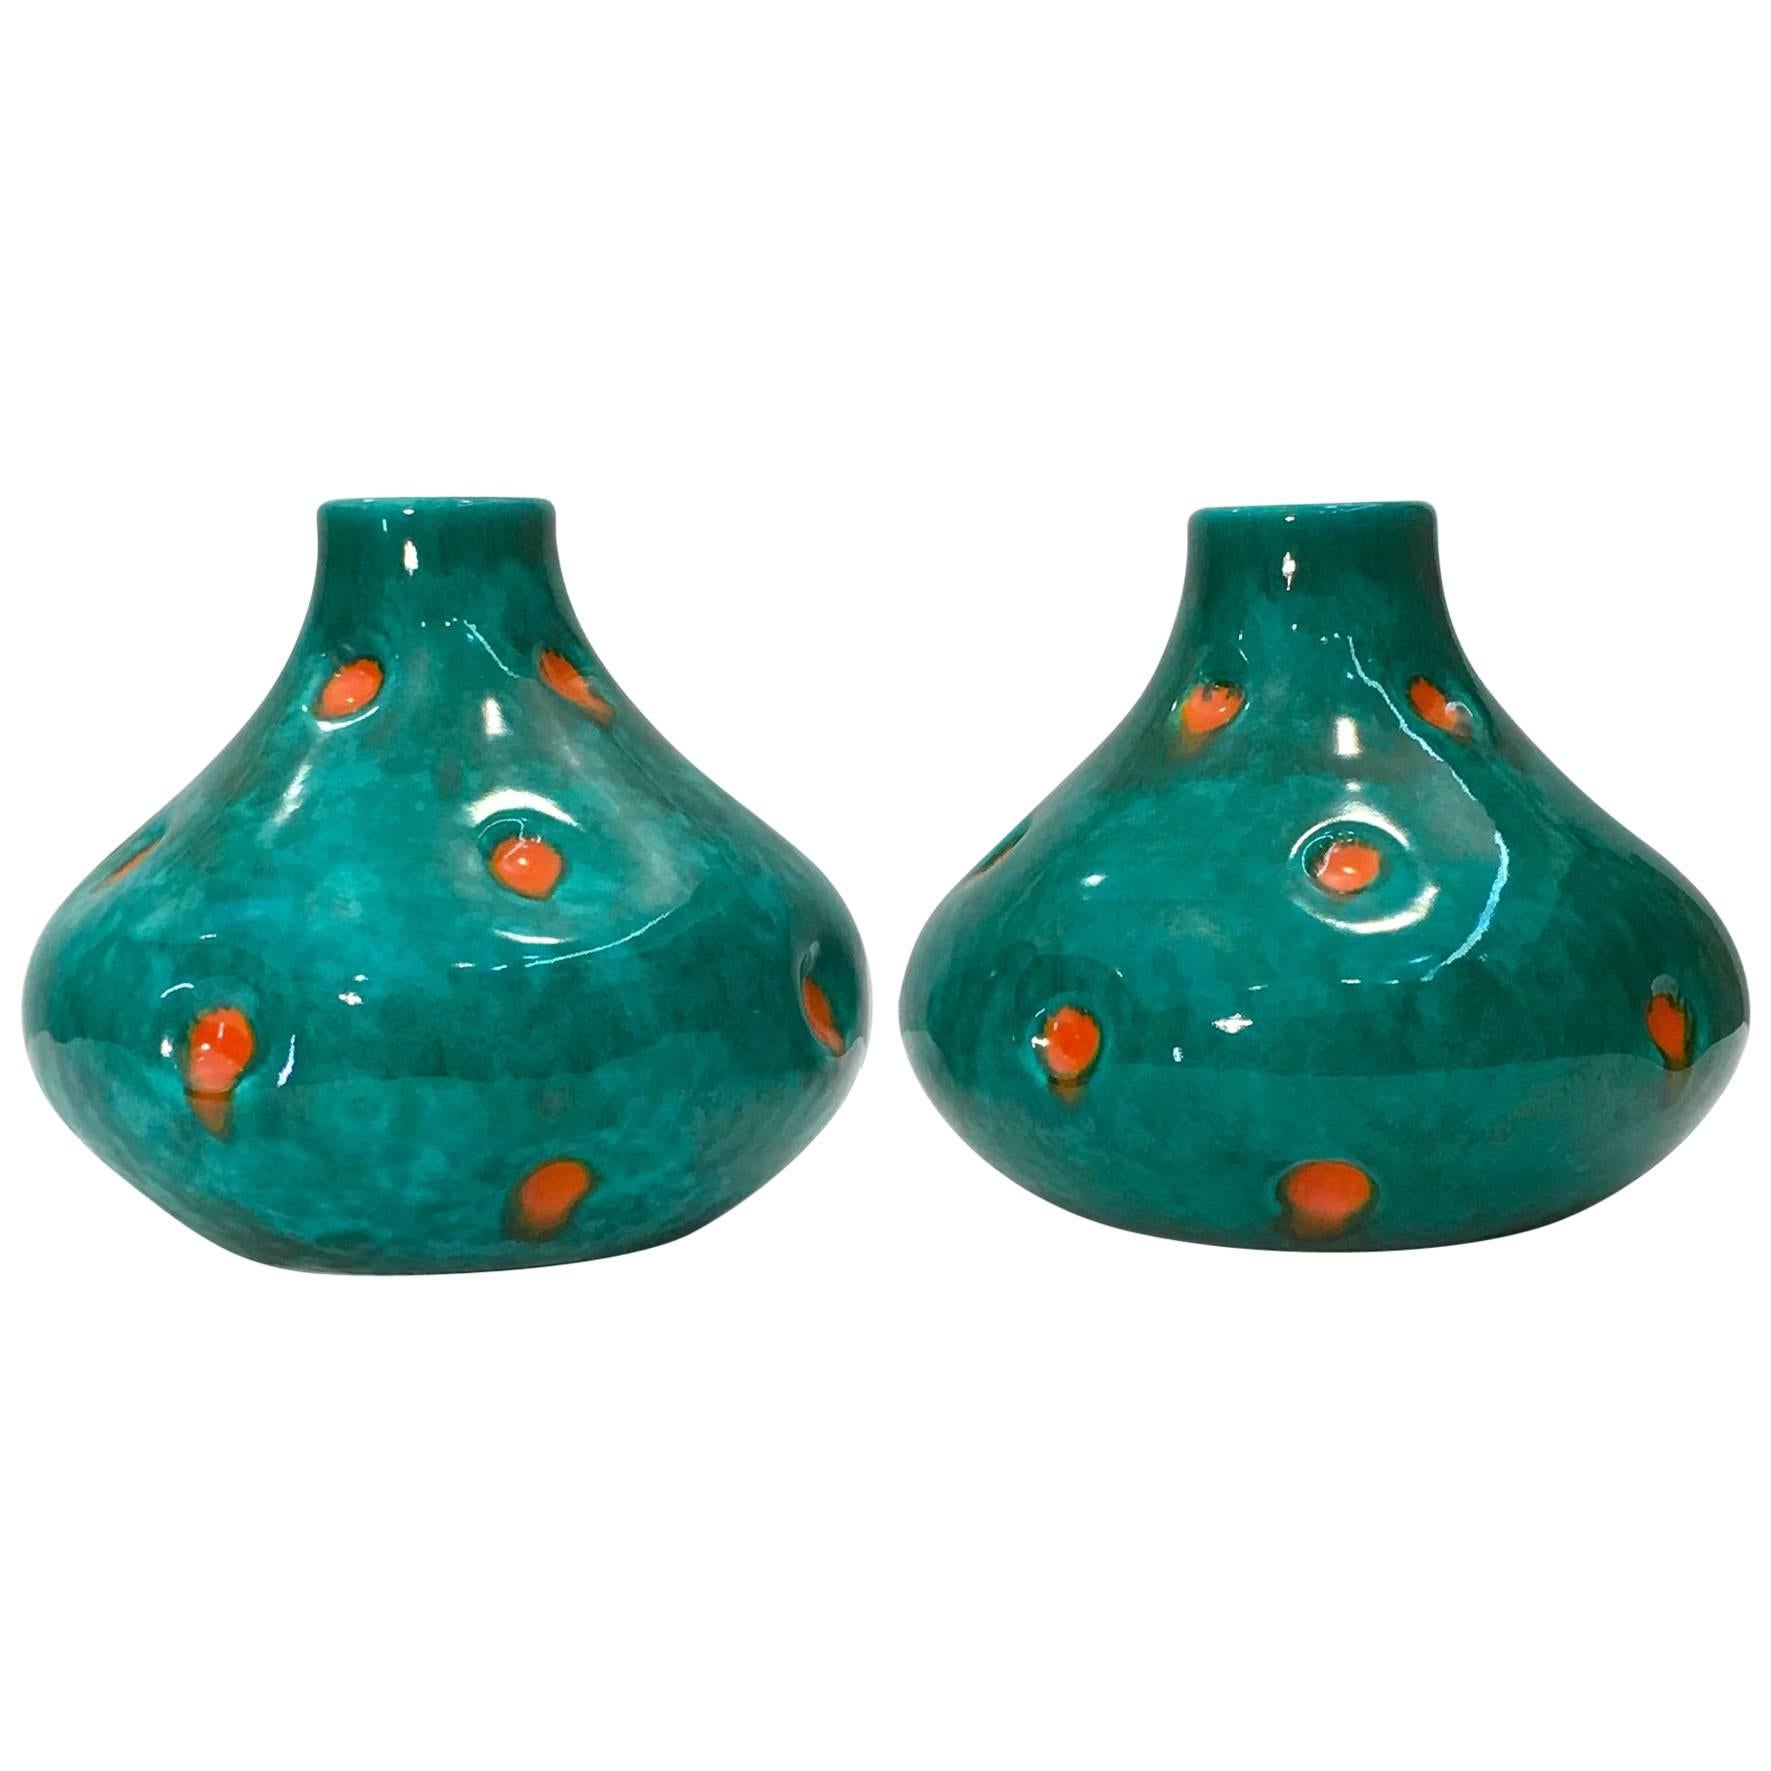 Matching Set of Two Vases by Pucci Umbertide, 1952